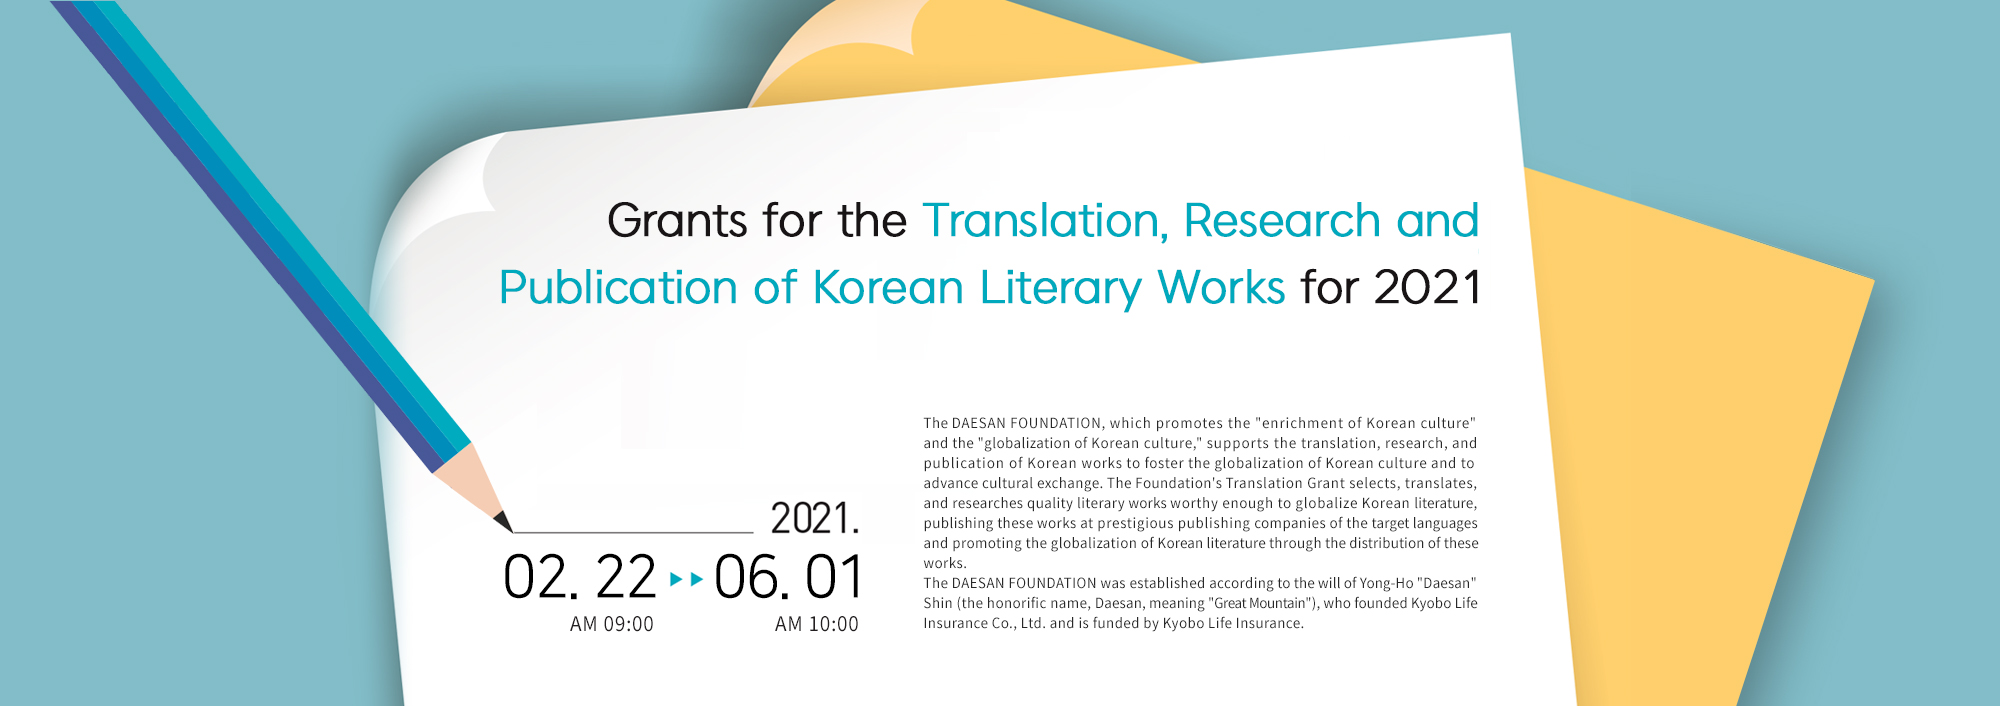 Grants for the Translation, Research and Publication of Korean Literary Works for 2021